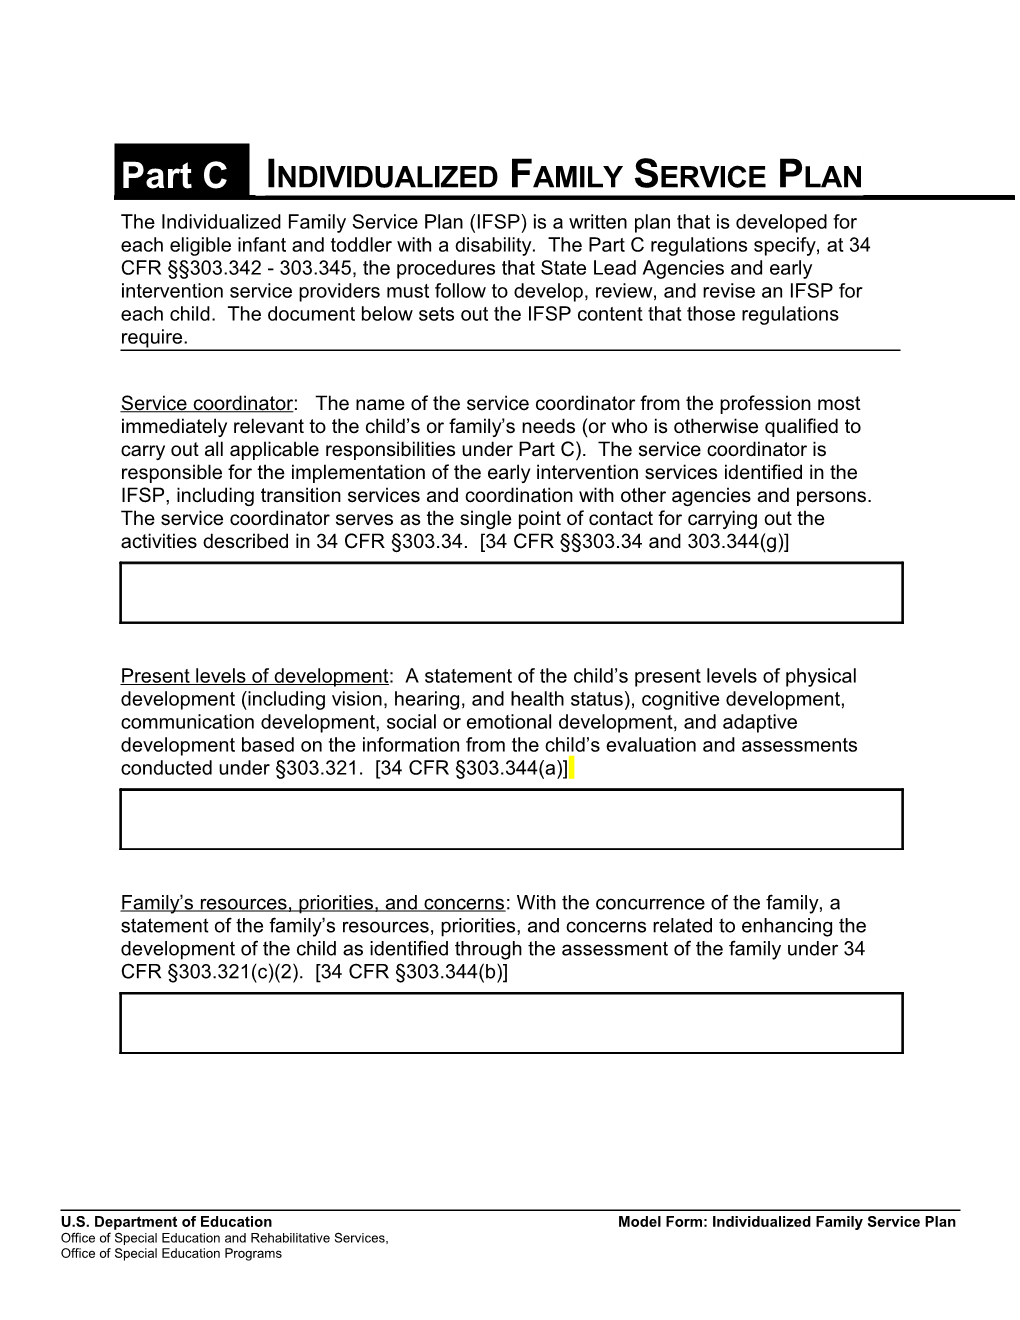 IDEA 2004 Model Forms: Individualized Family Service Plan (MS Word)